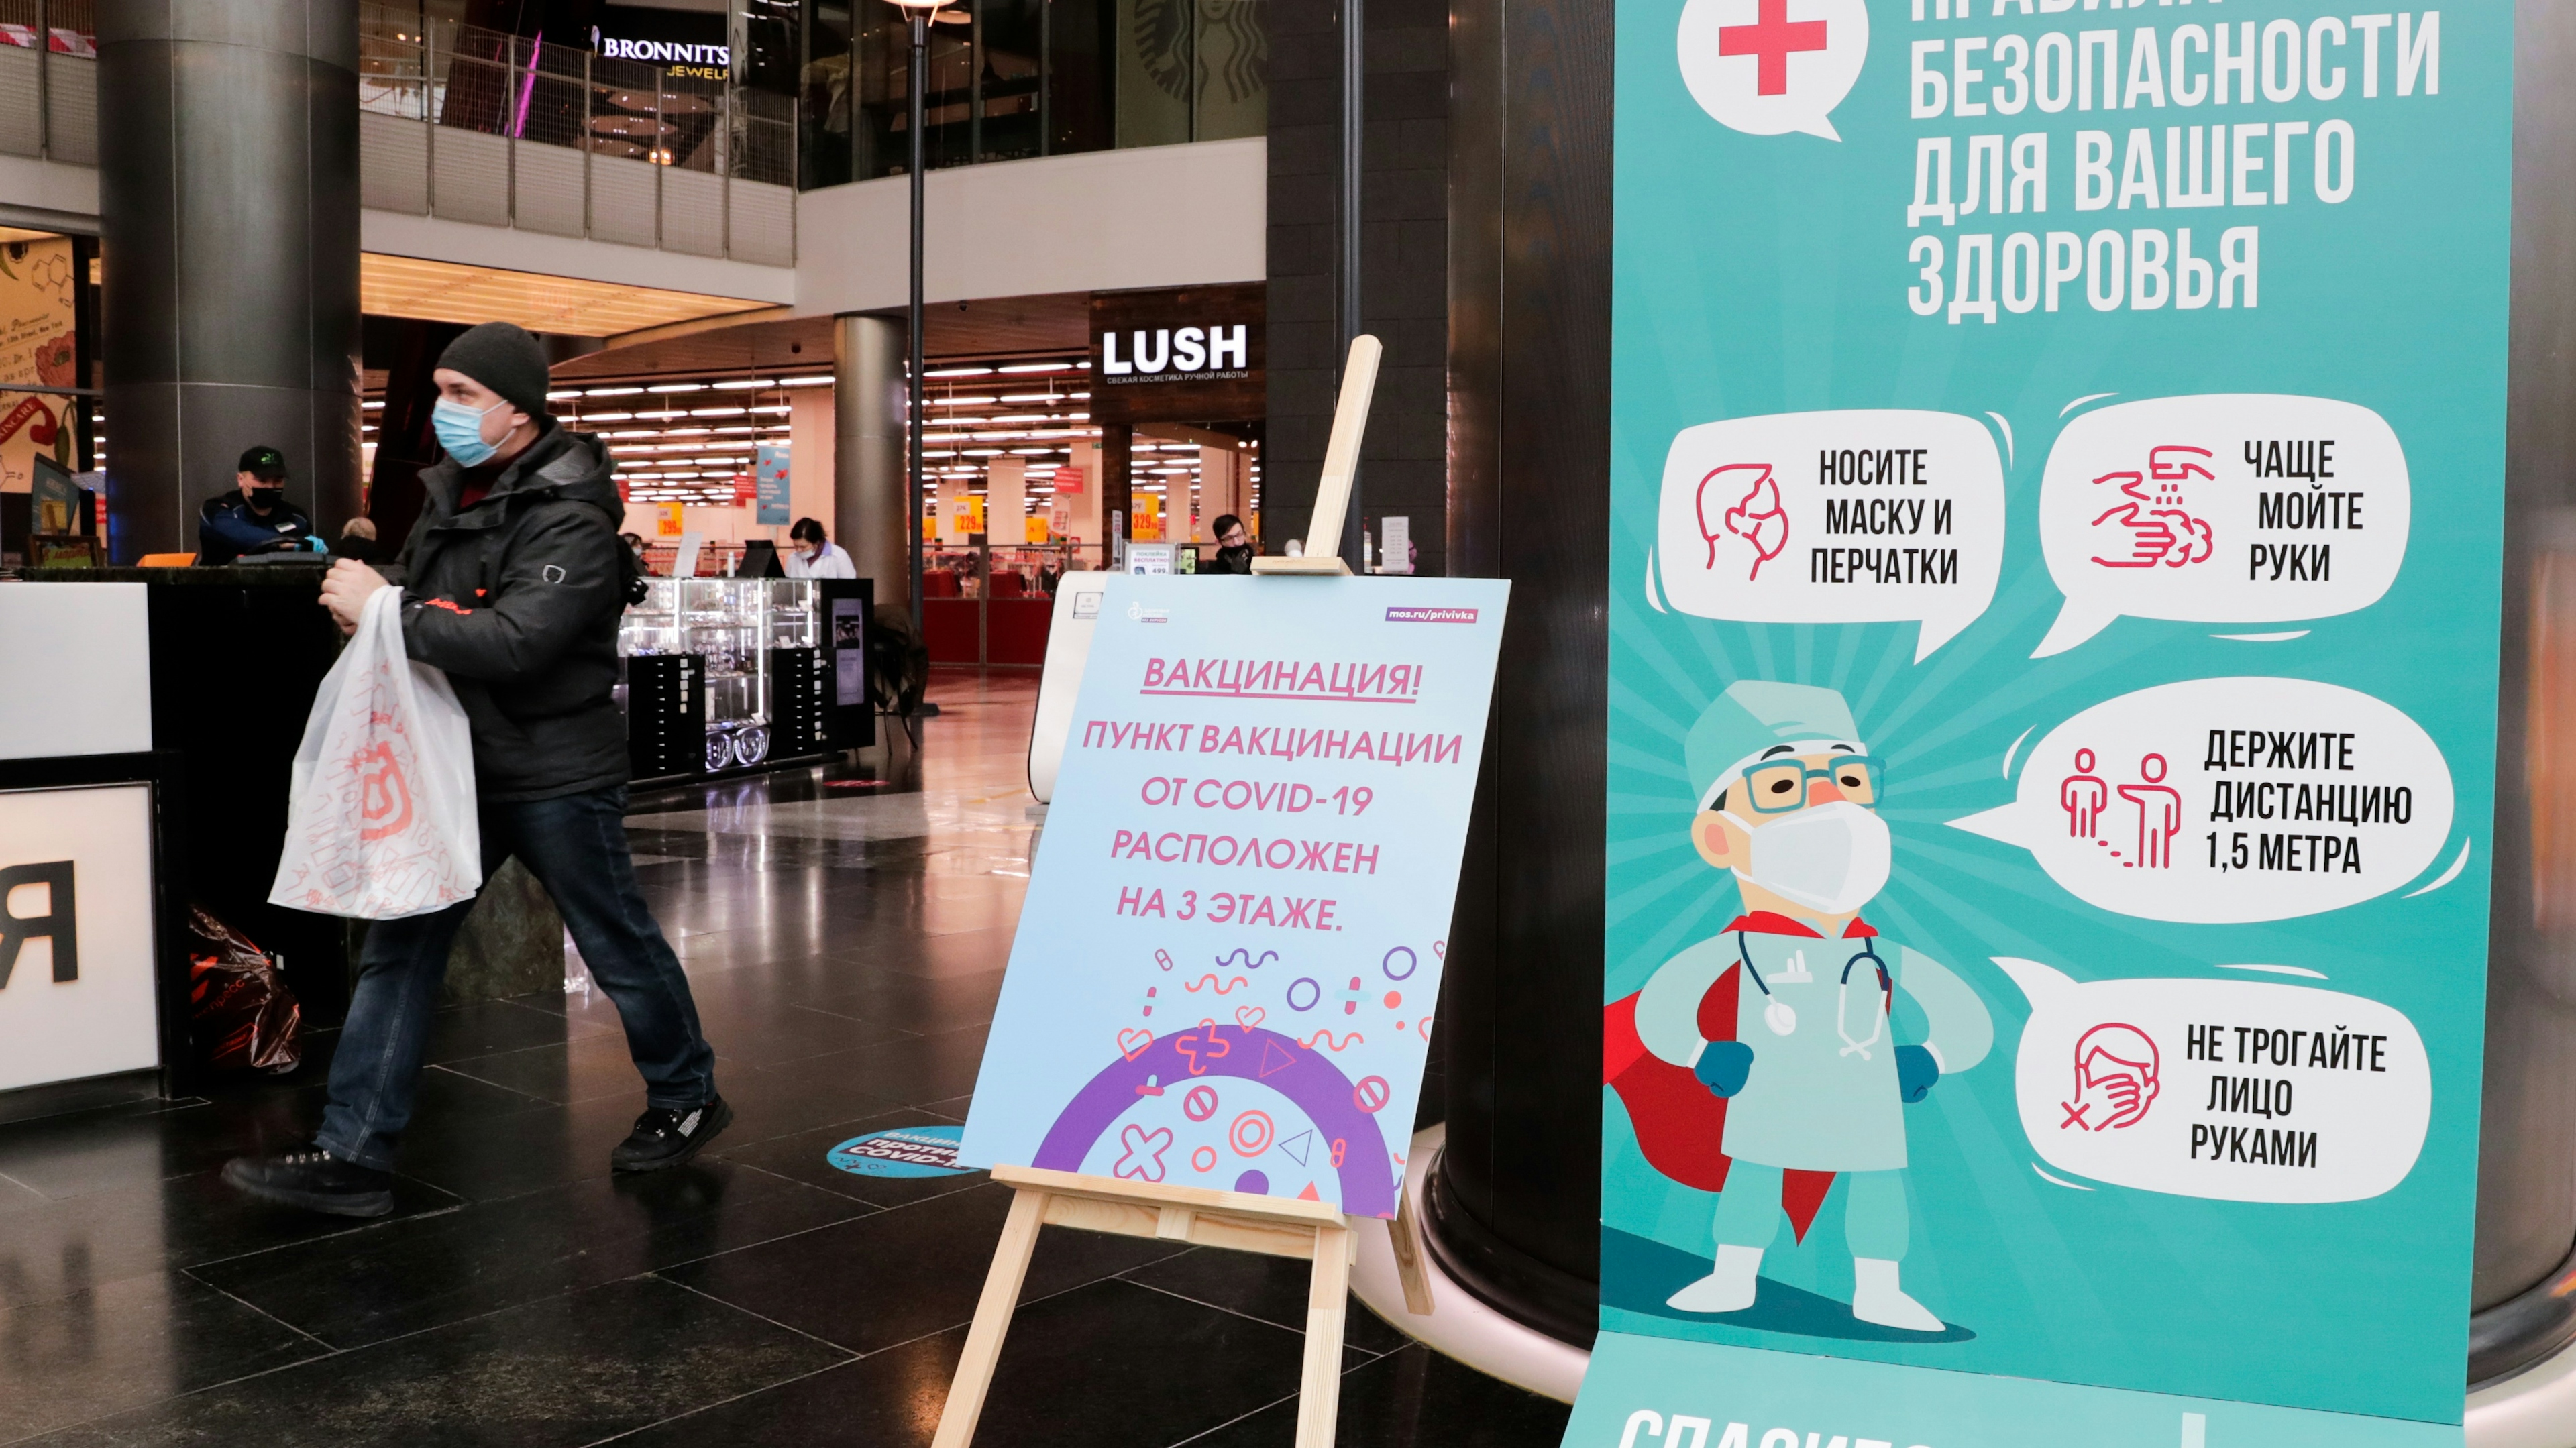 COVID-19 vaccination site at Moscow's Kuntsevo Plaza shopping mall